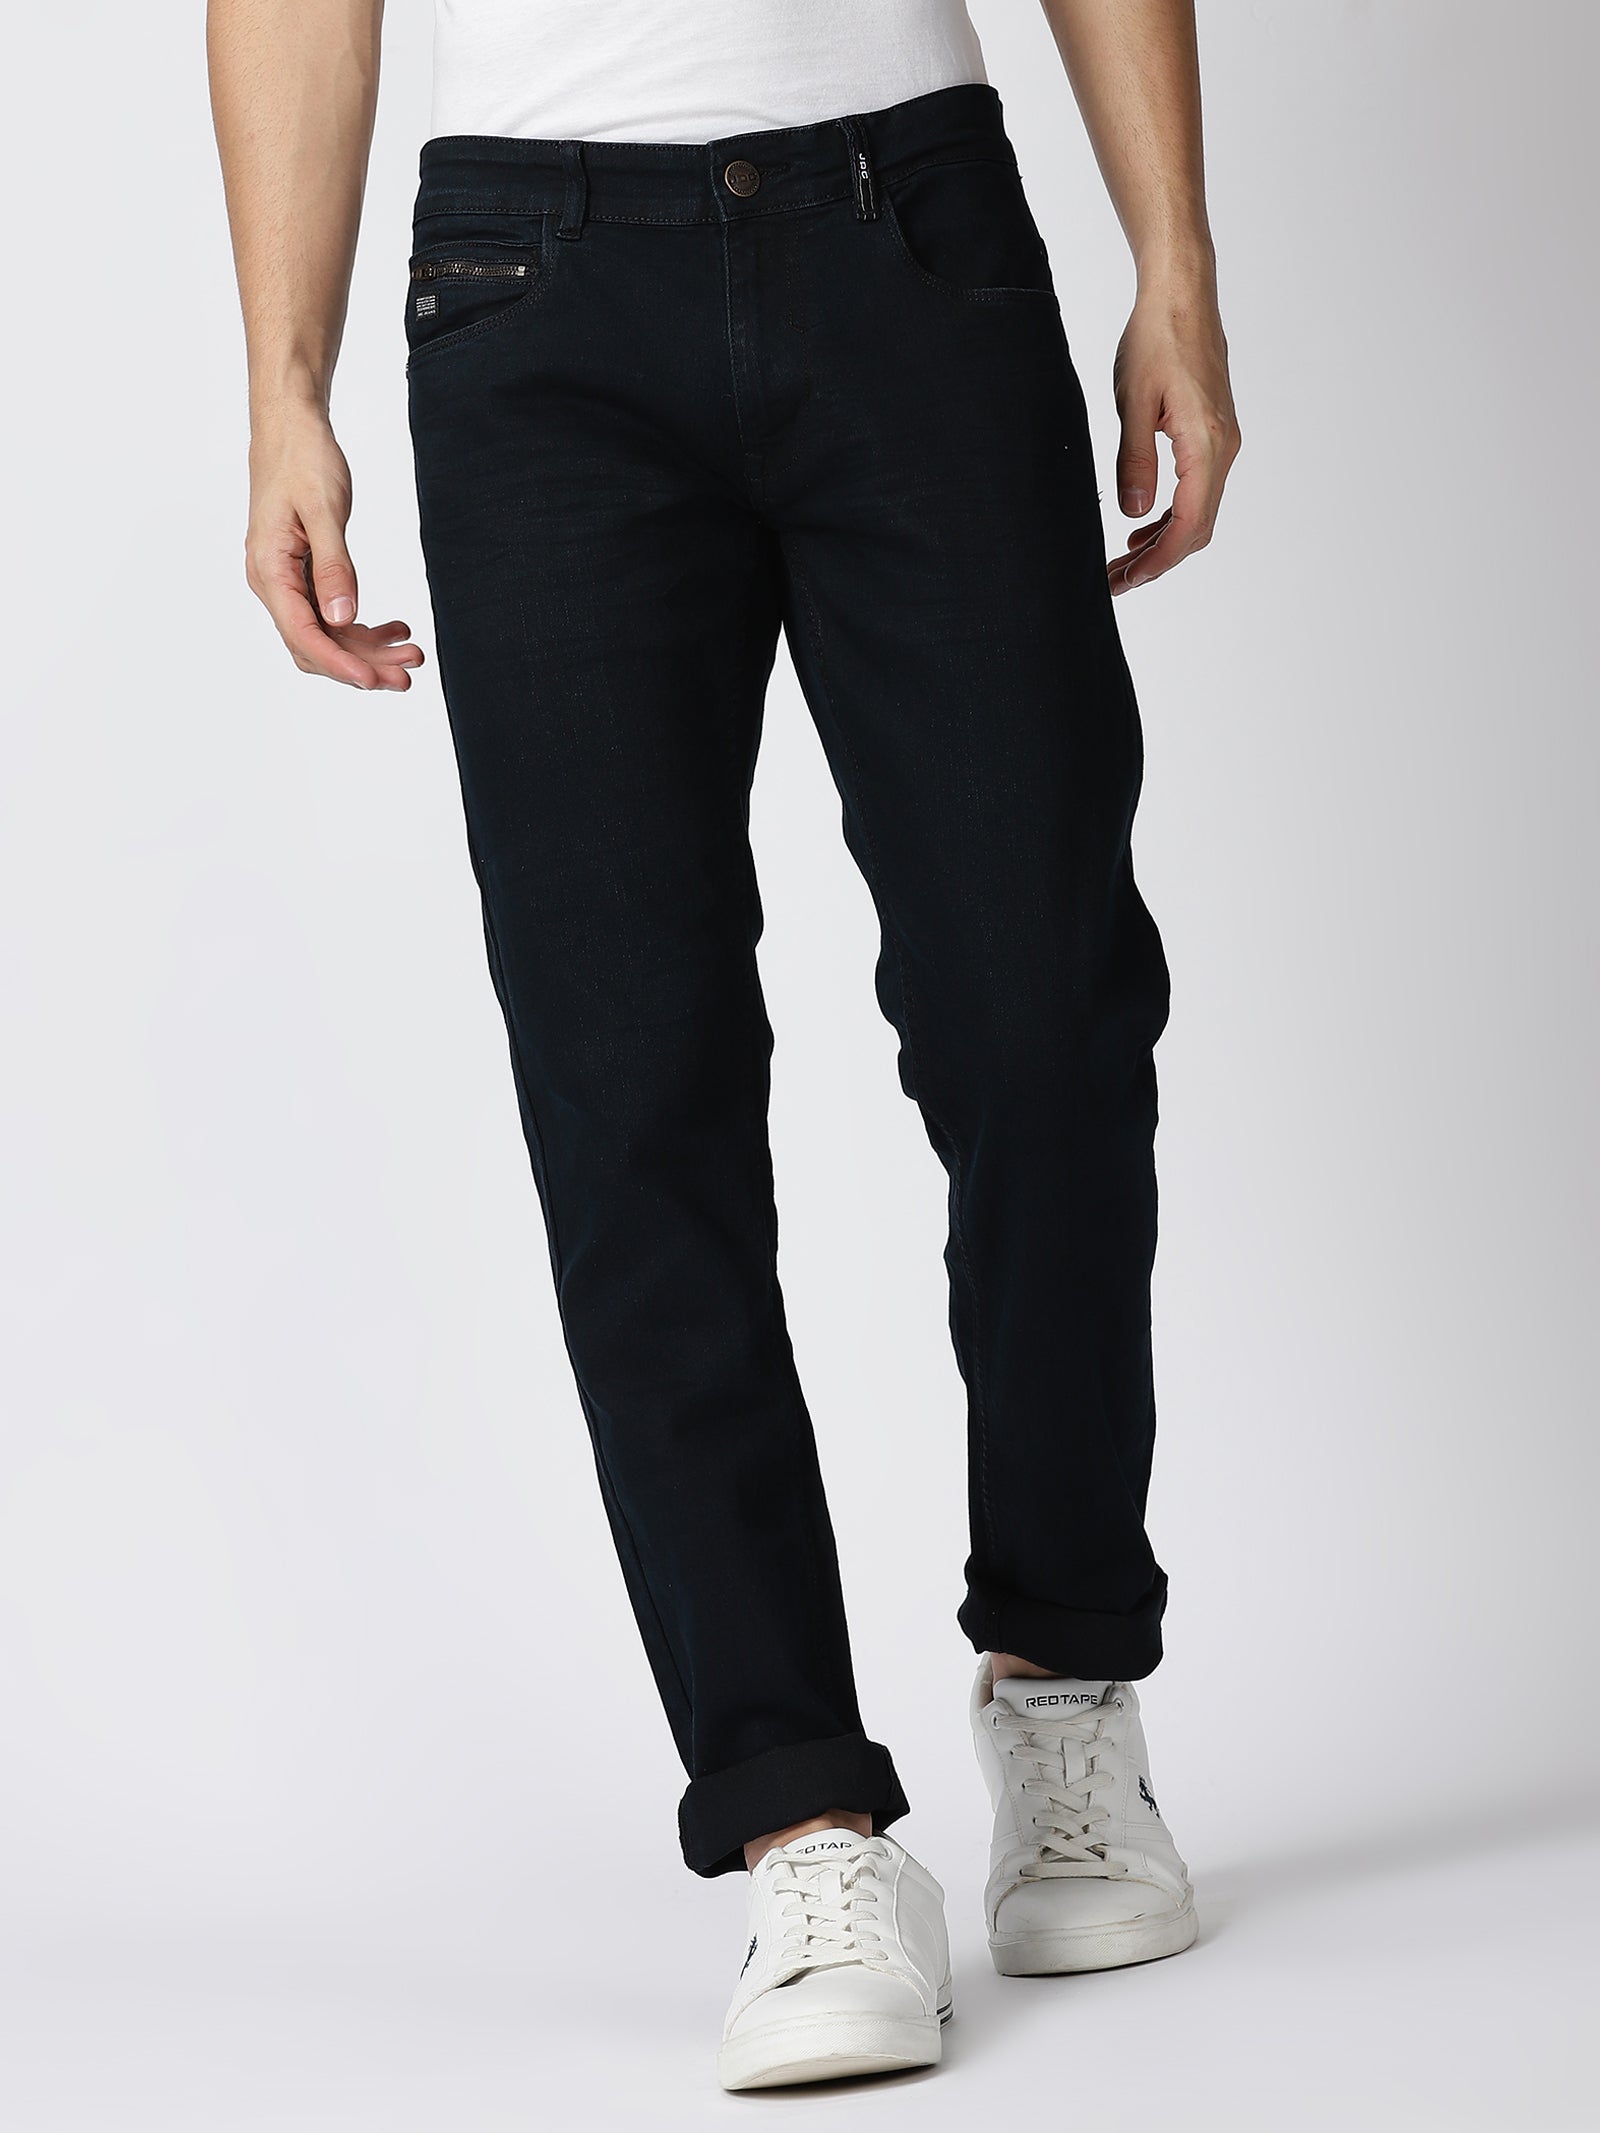 Red Tape Men Vintage Blue Skinny Fit Jeans_RDM0654-32 : Amazon.in: Fashion